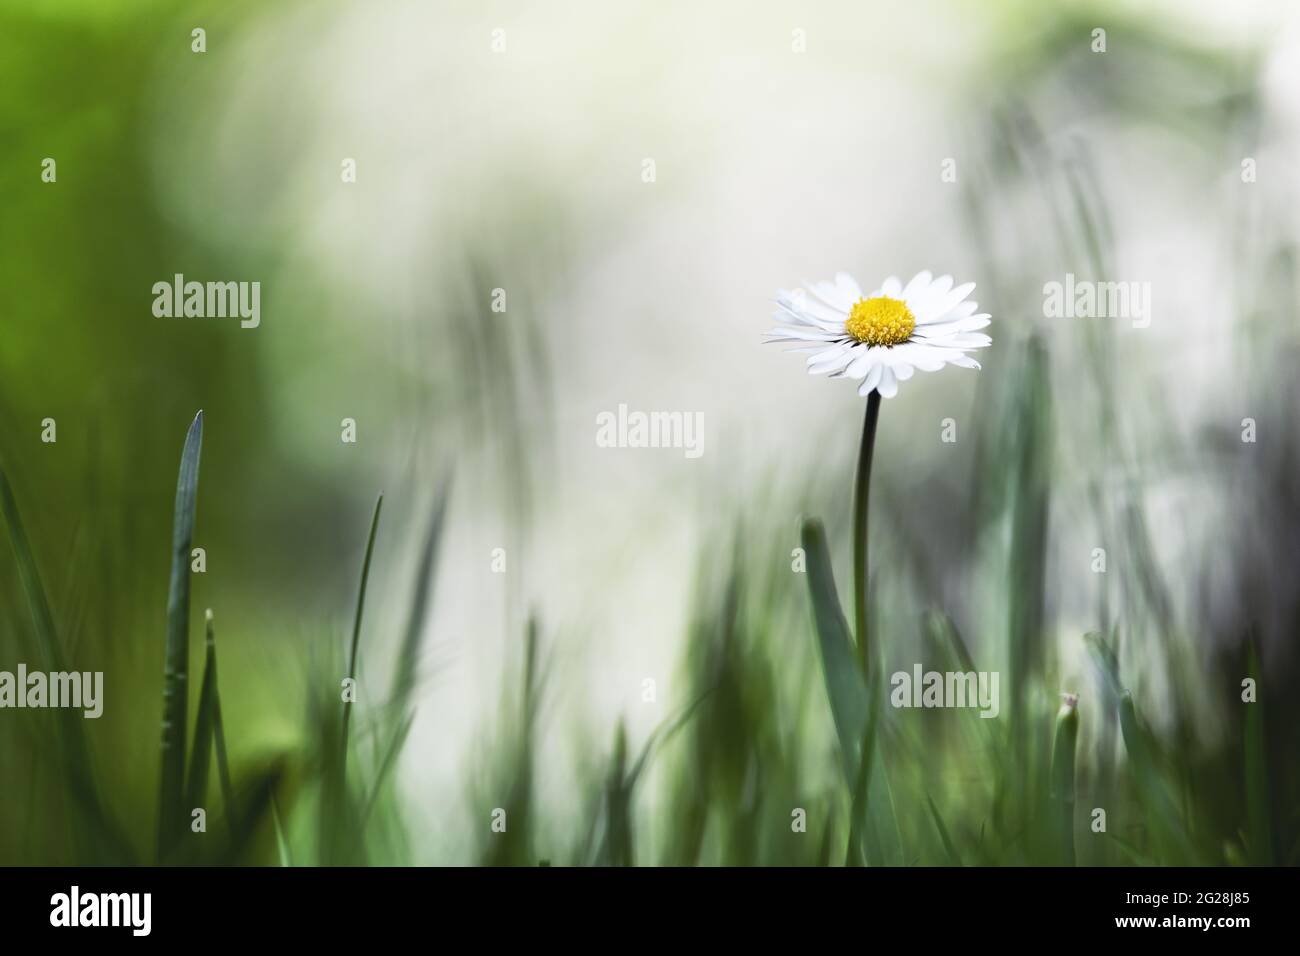 Closeup nature view of green creative layout made of green grass and single daisy flower on spring meadow. Natural background Stock Photo